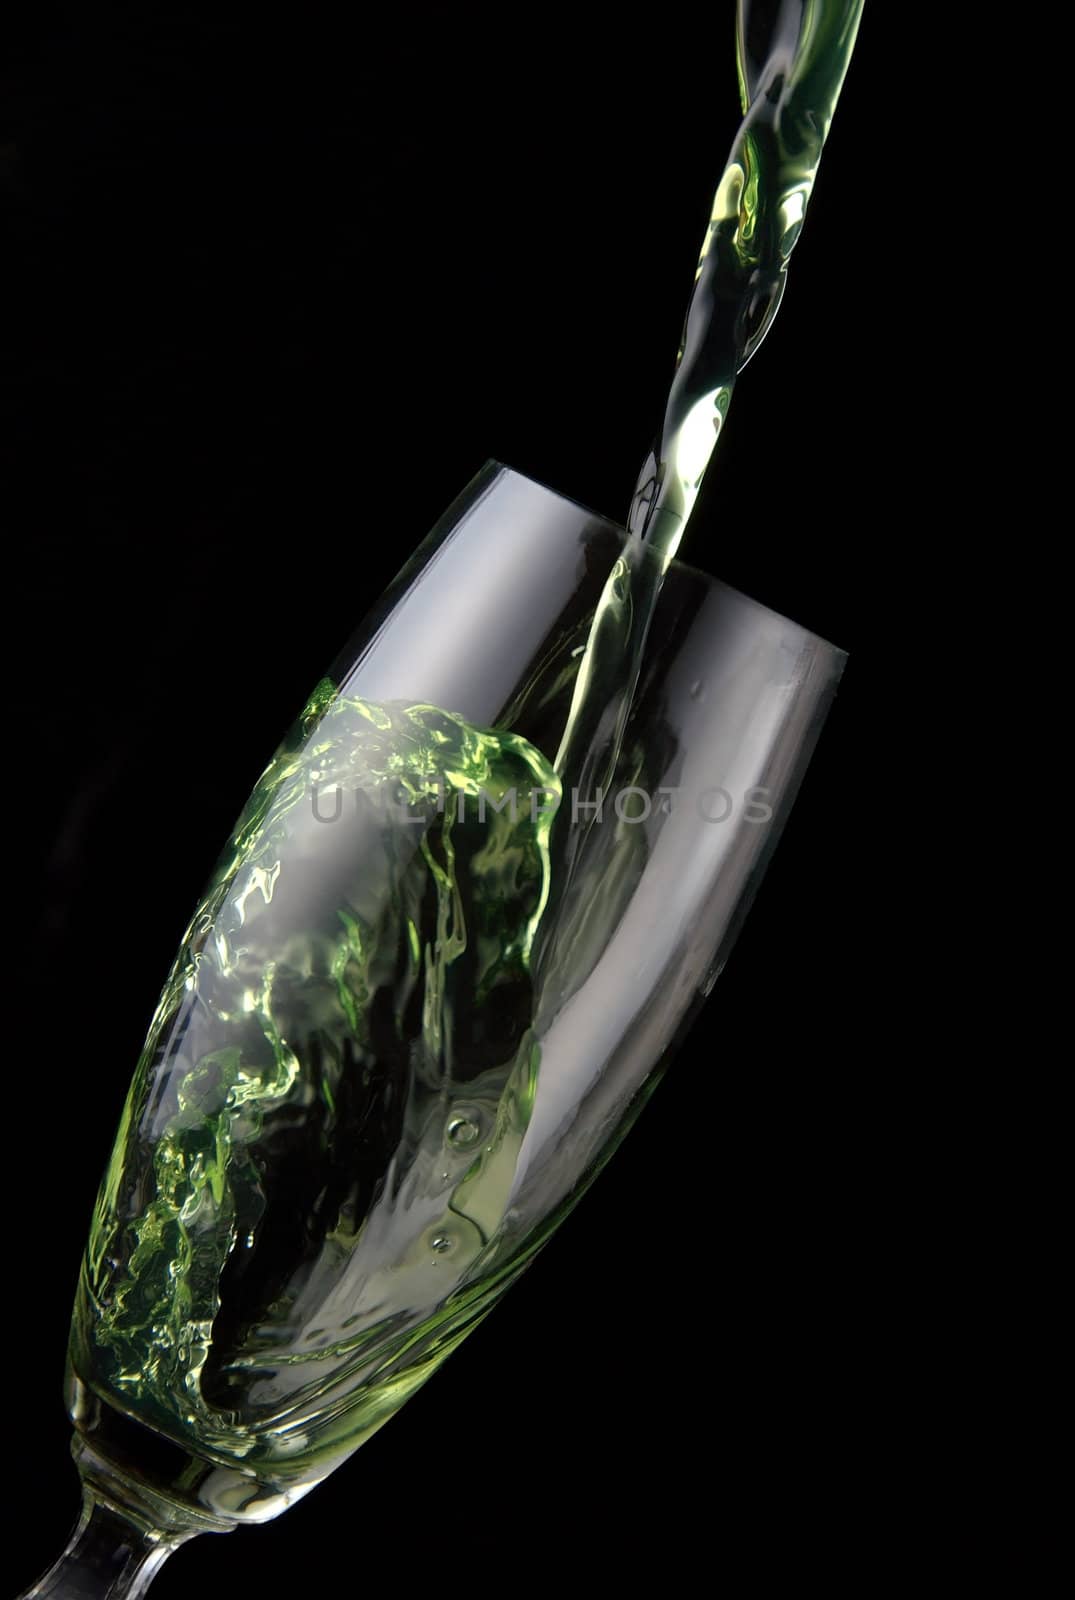 glass of drink poured by anki21